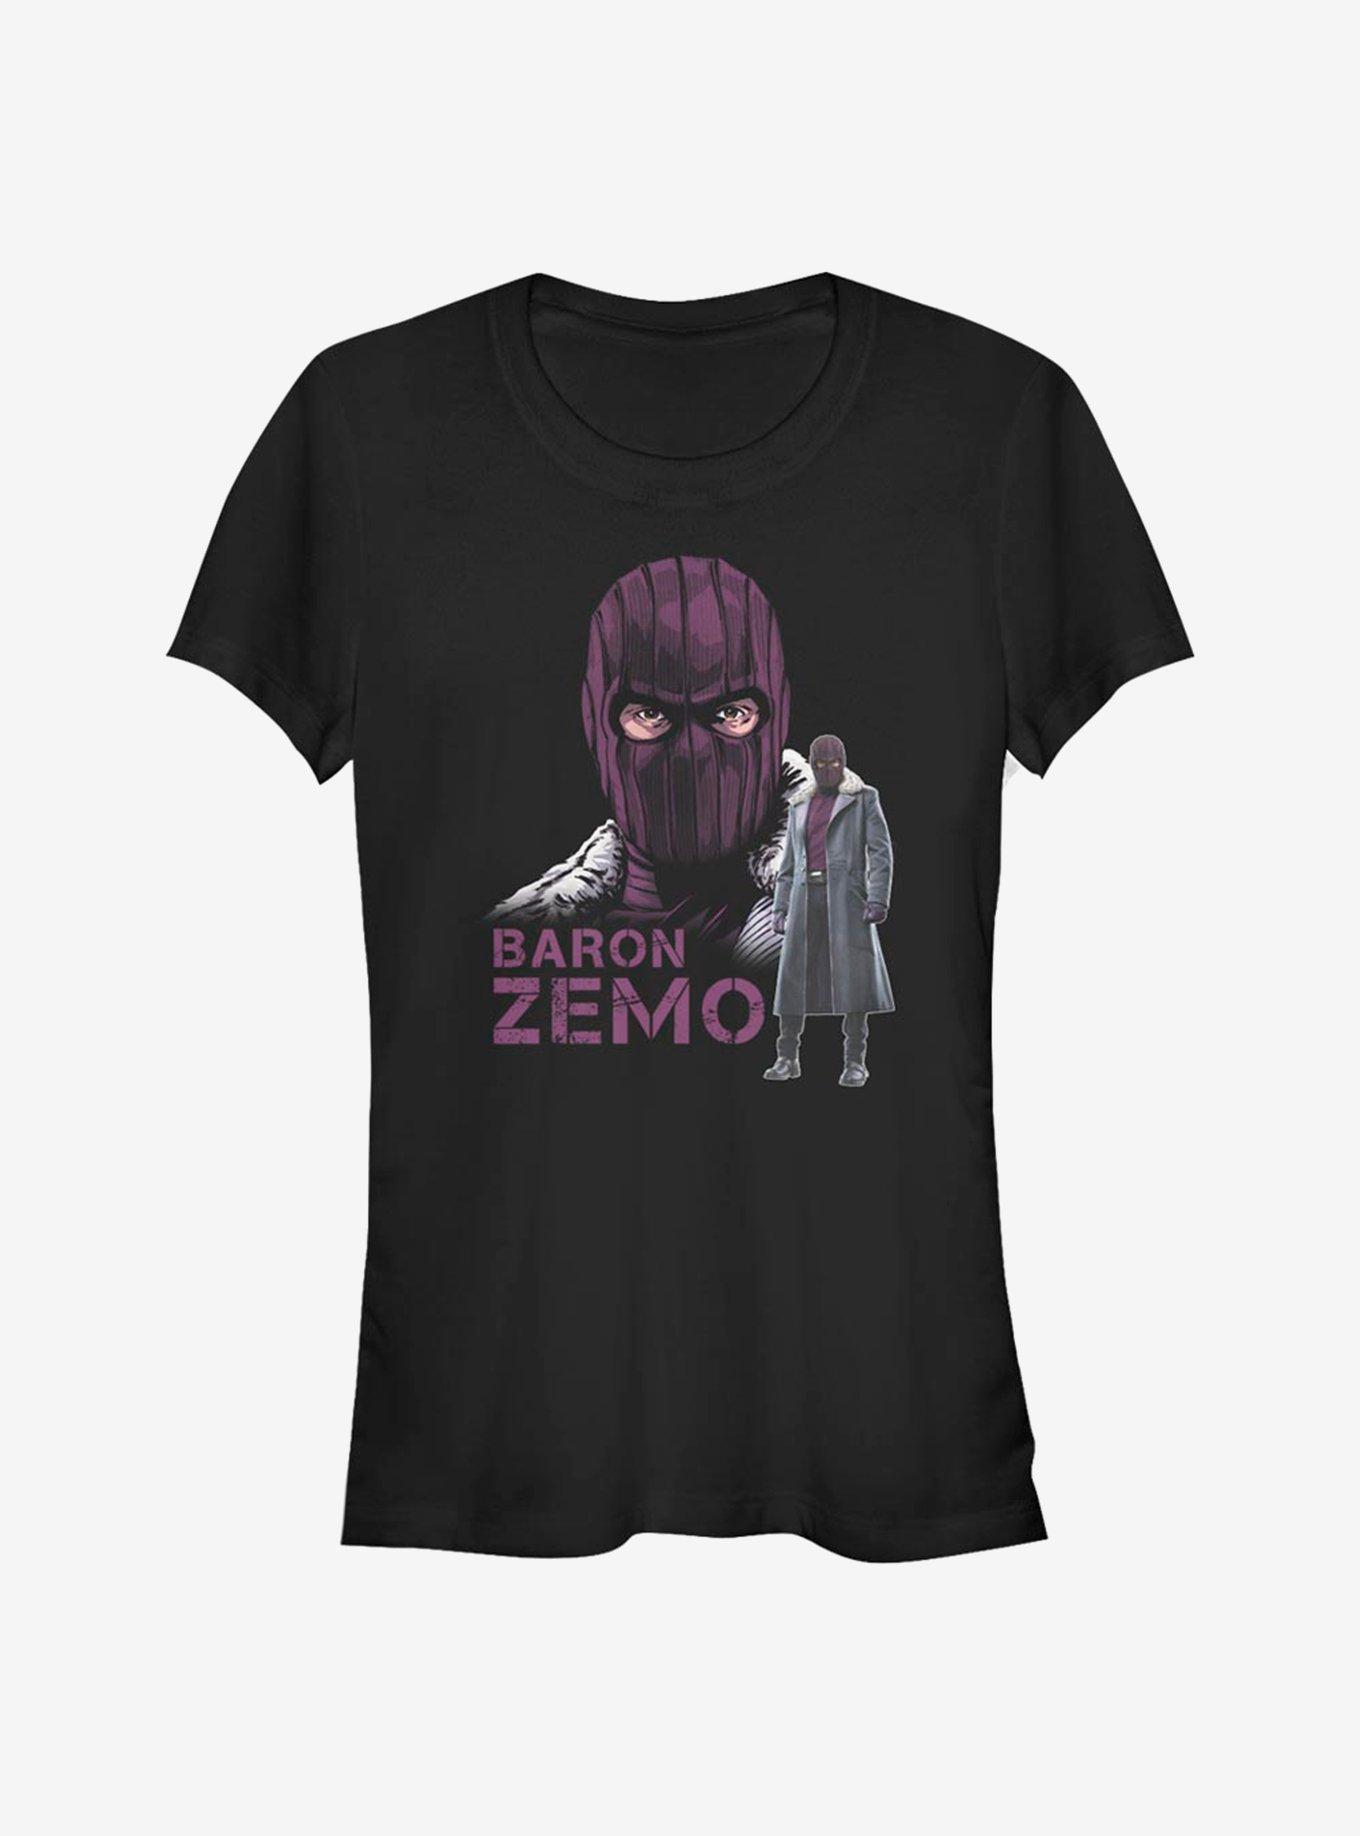 Marvel The Falcon And The Winter Soldier Masked Baron Zemo Girls T-Shirt, BLACK, hi-res